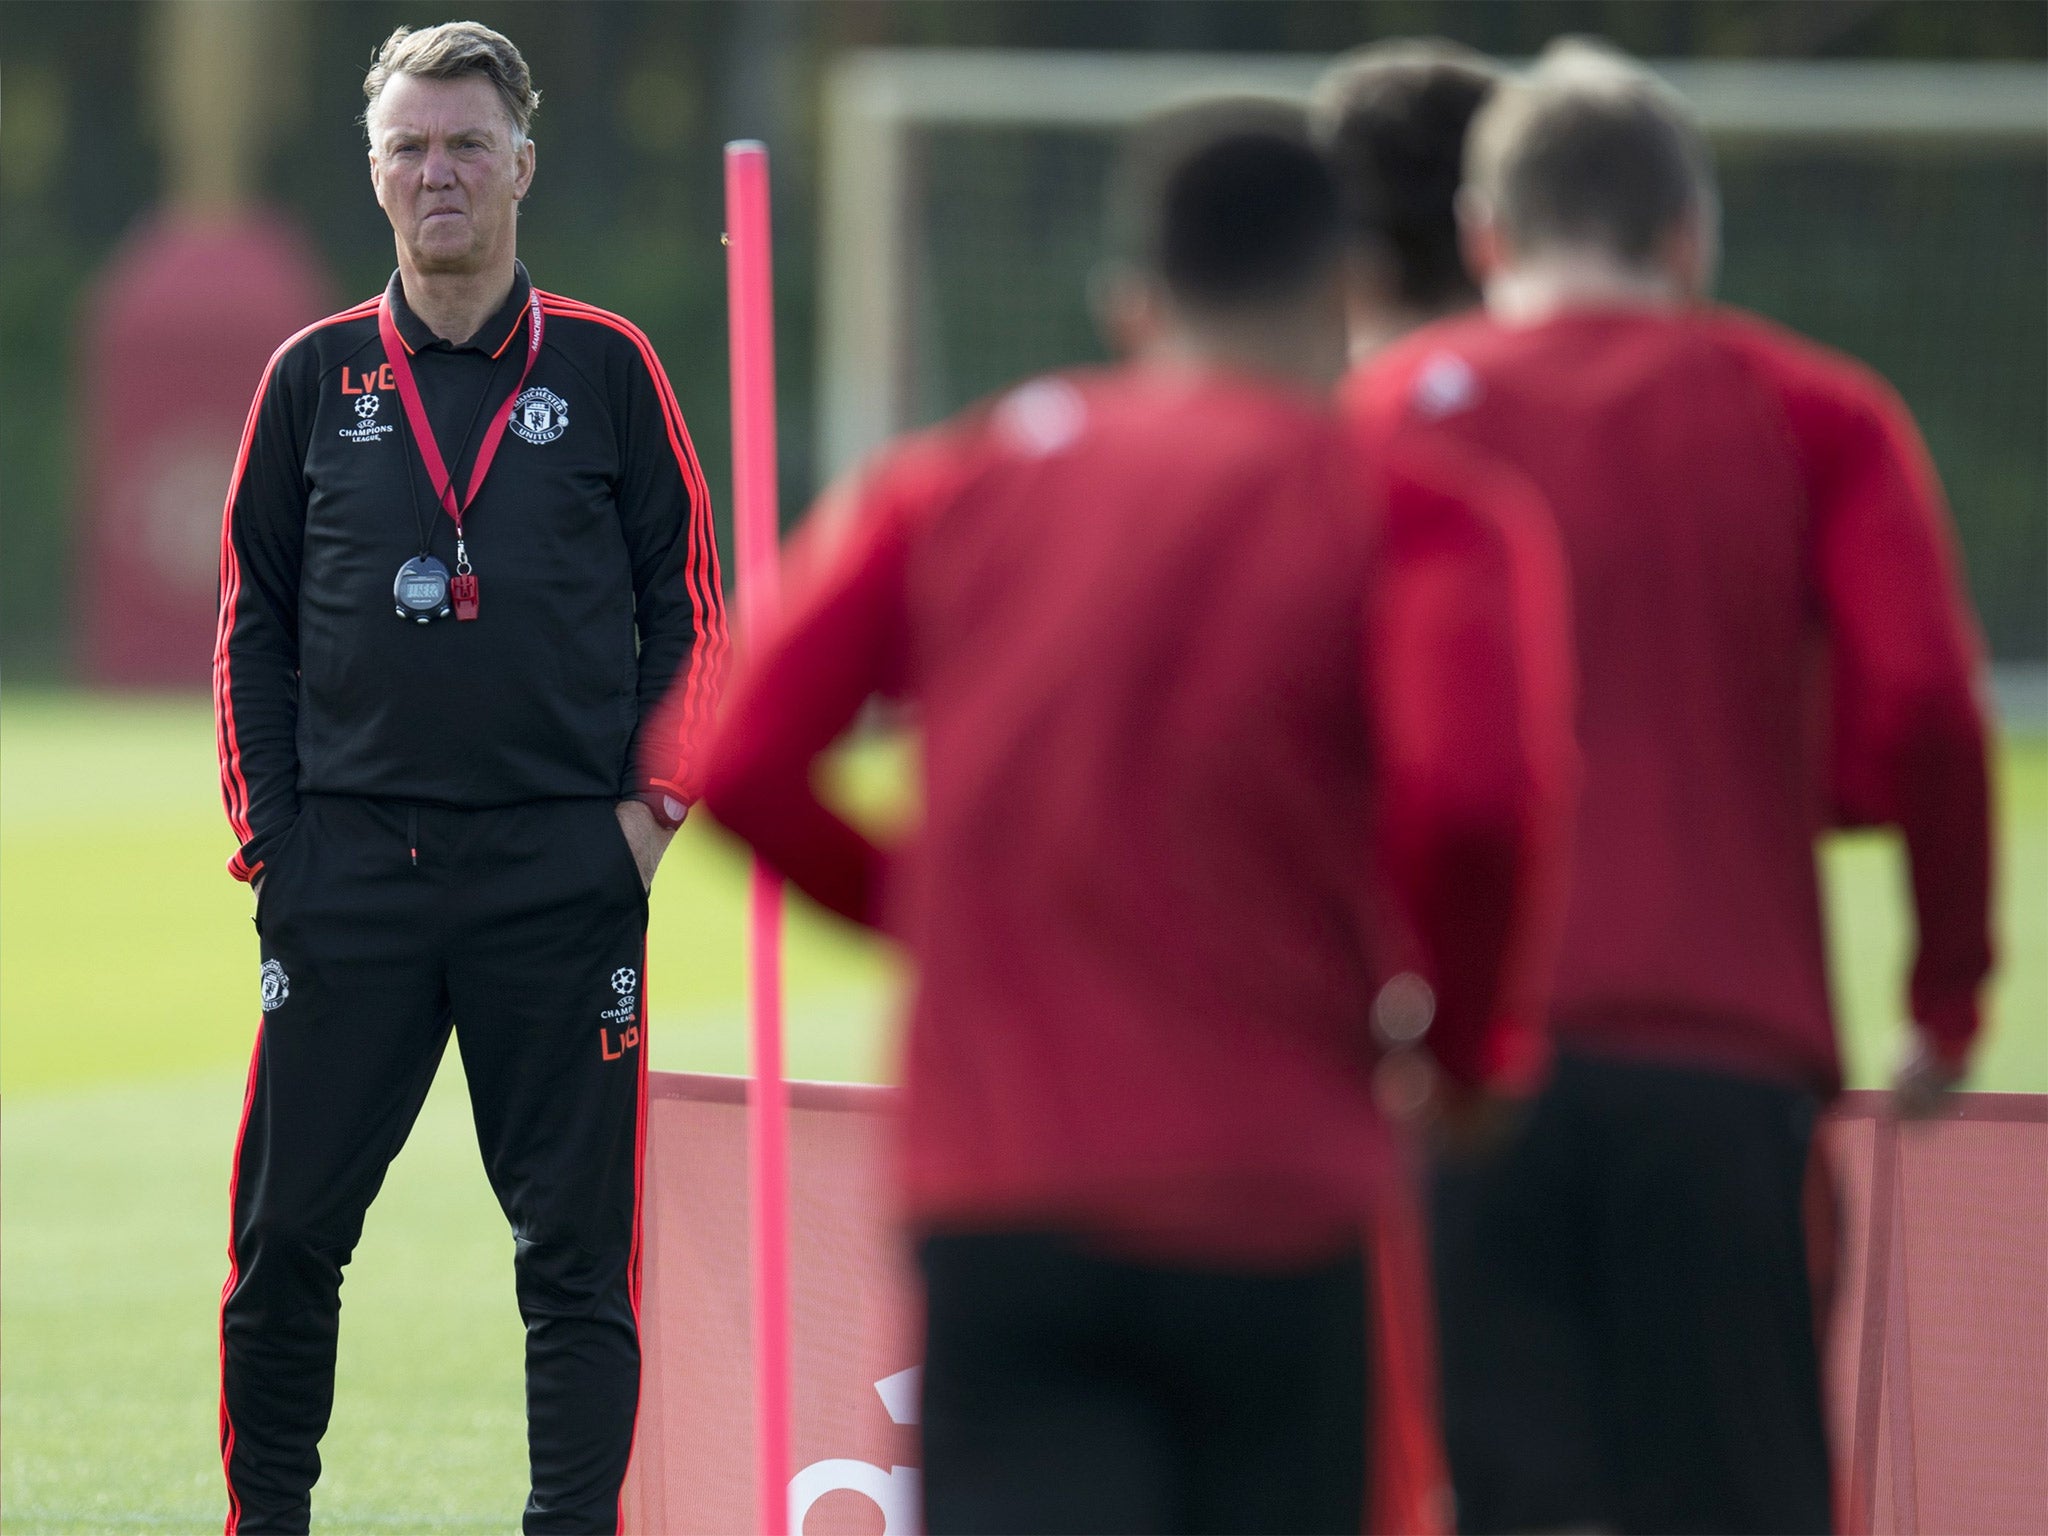 The Manchester United manager looks on during training